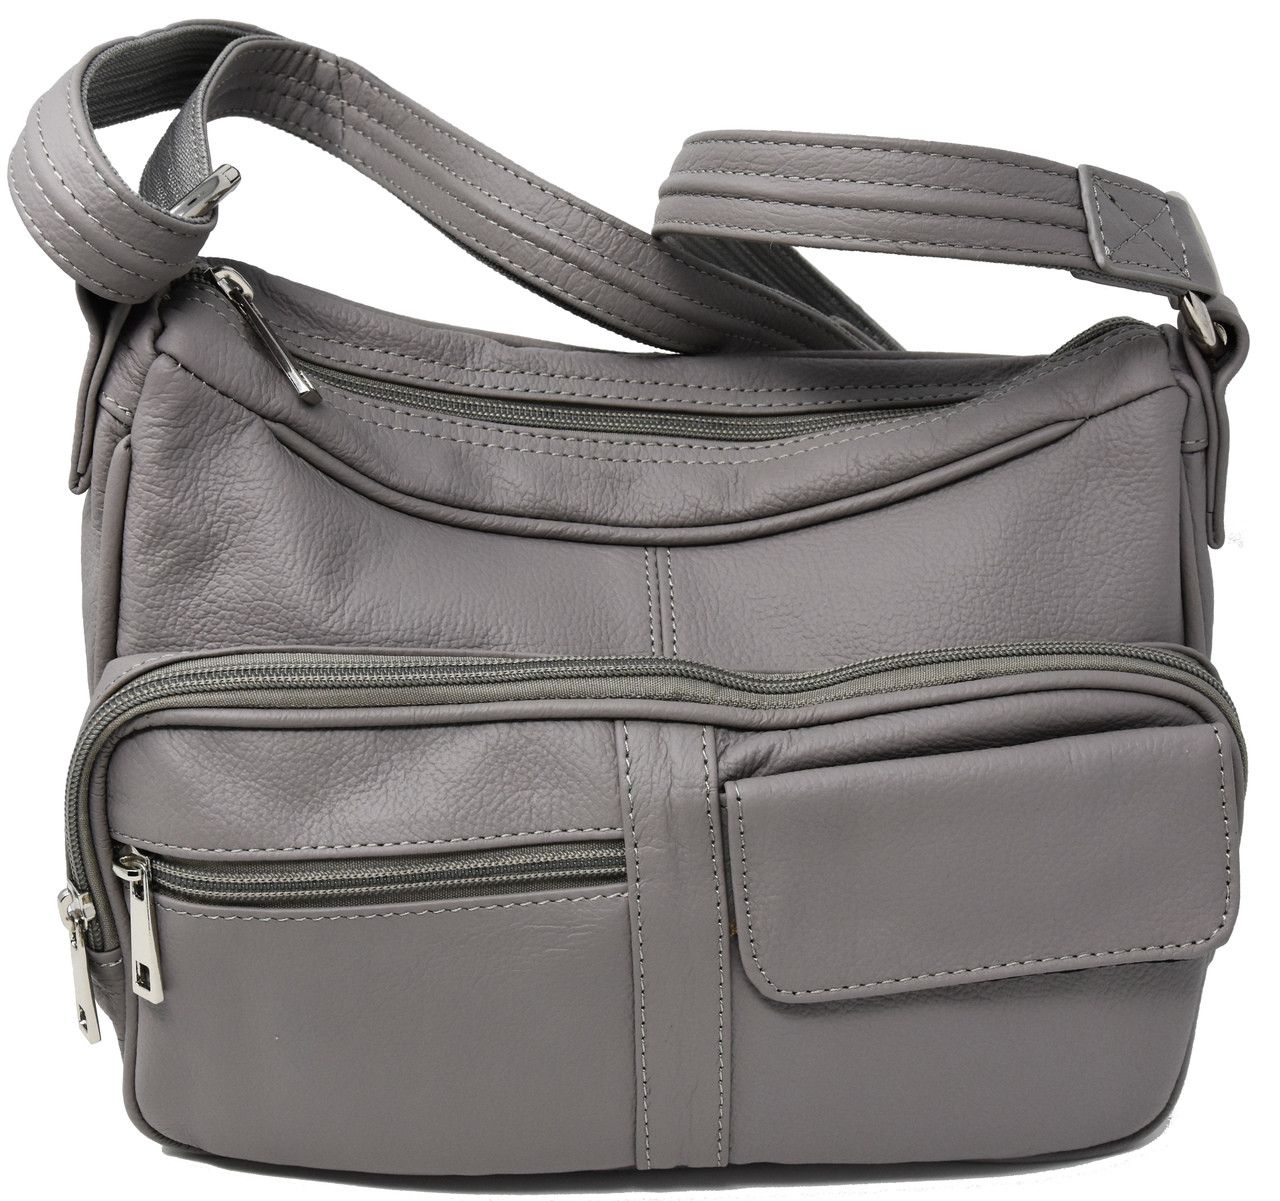 Gray Crossbody or Shoulder Carry Leather Locking Concealment Purse - CCW Concealed Carry Gun Bag